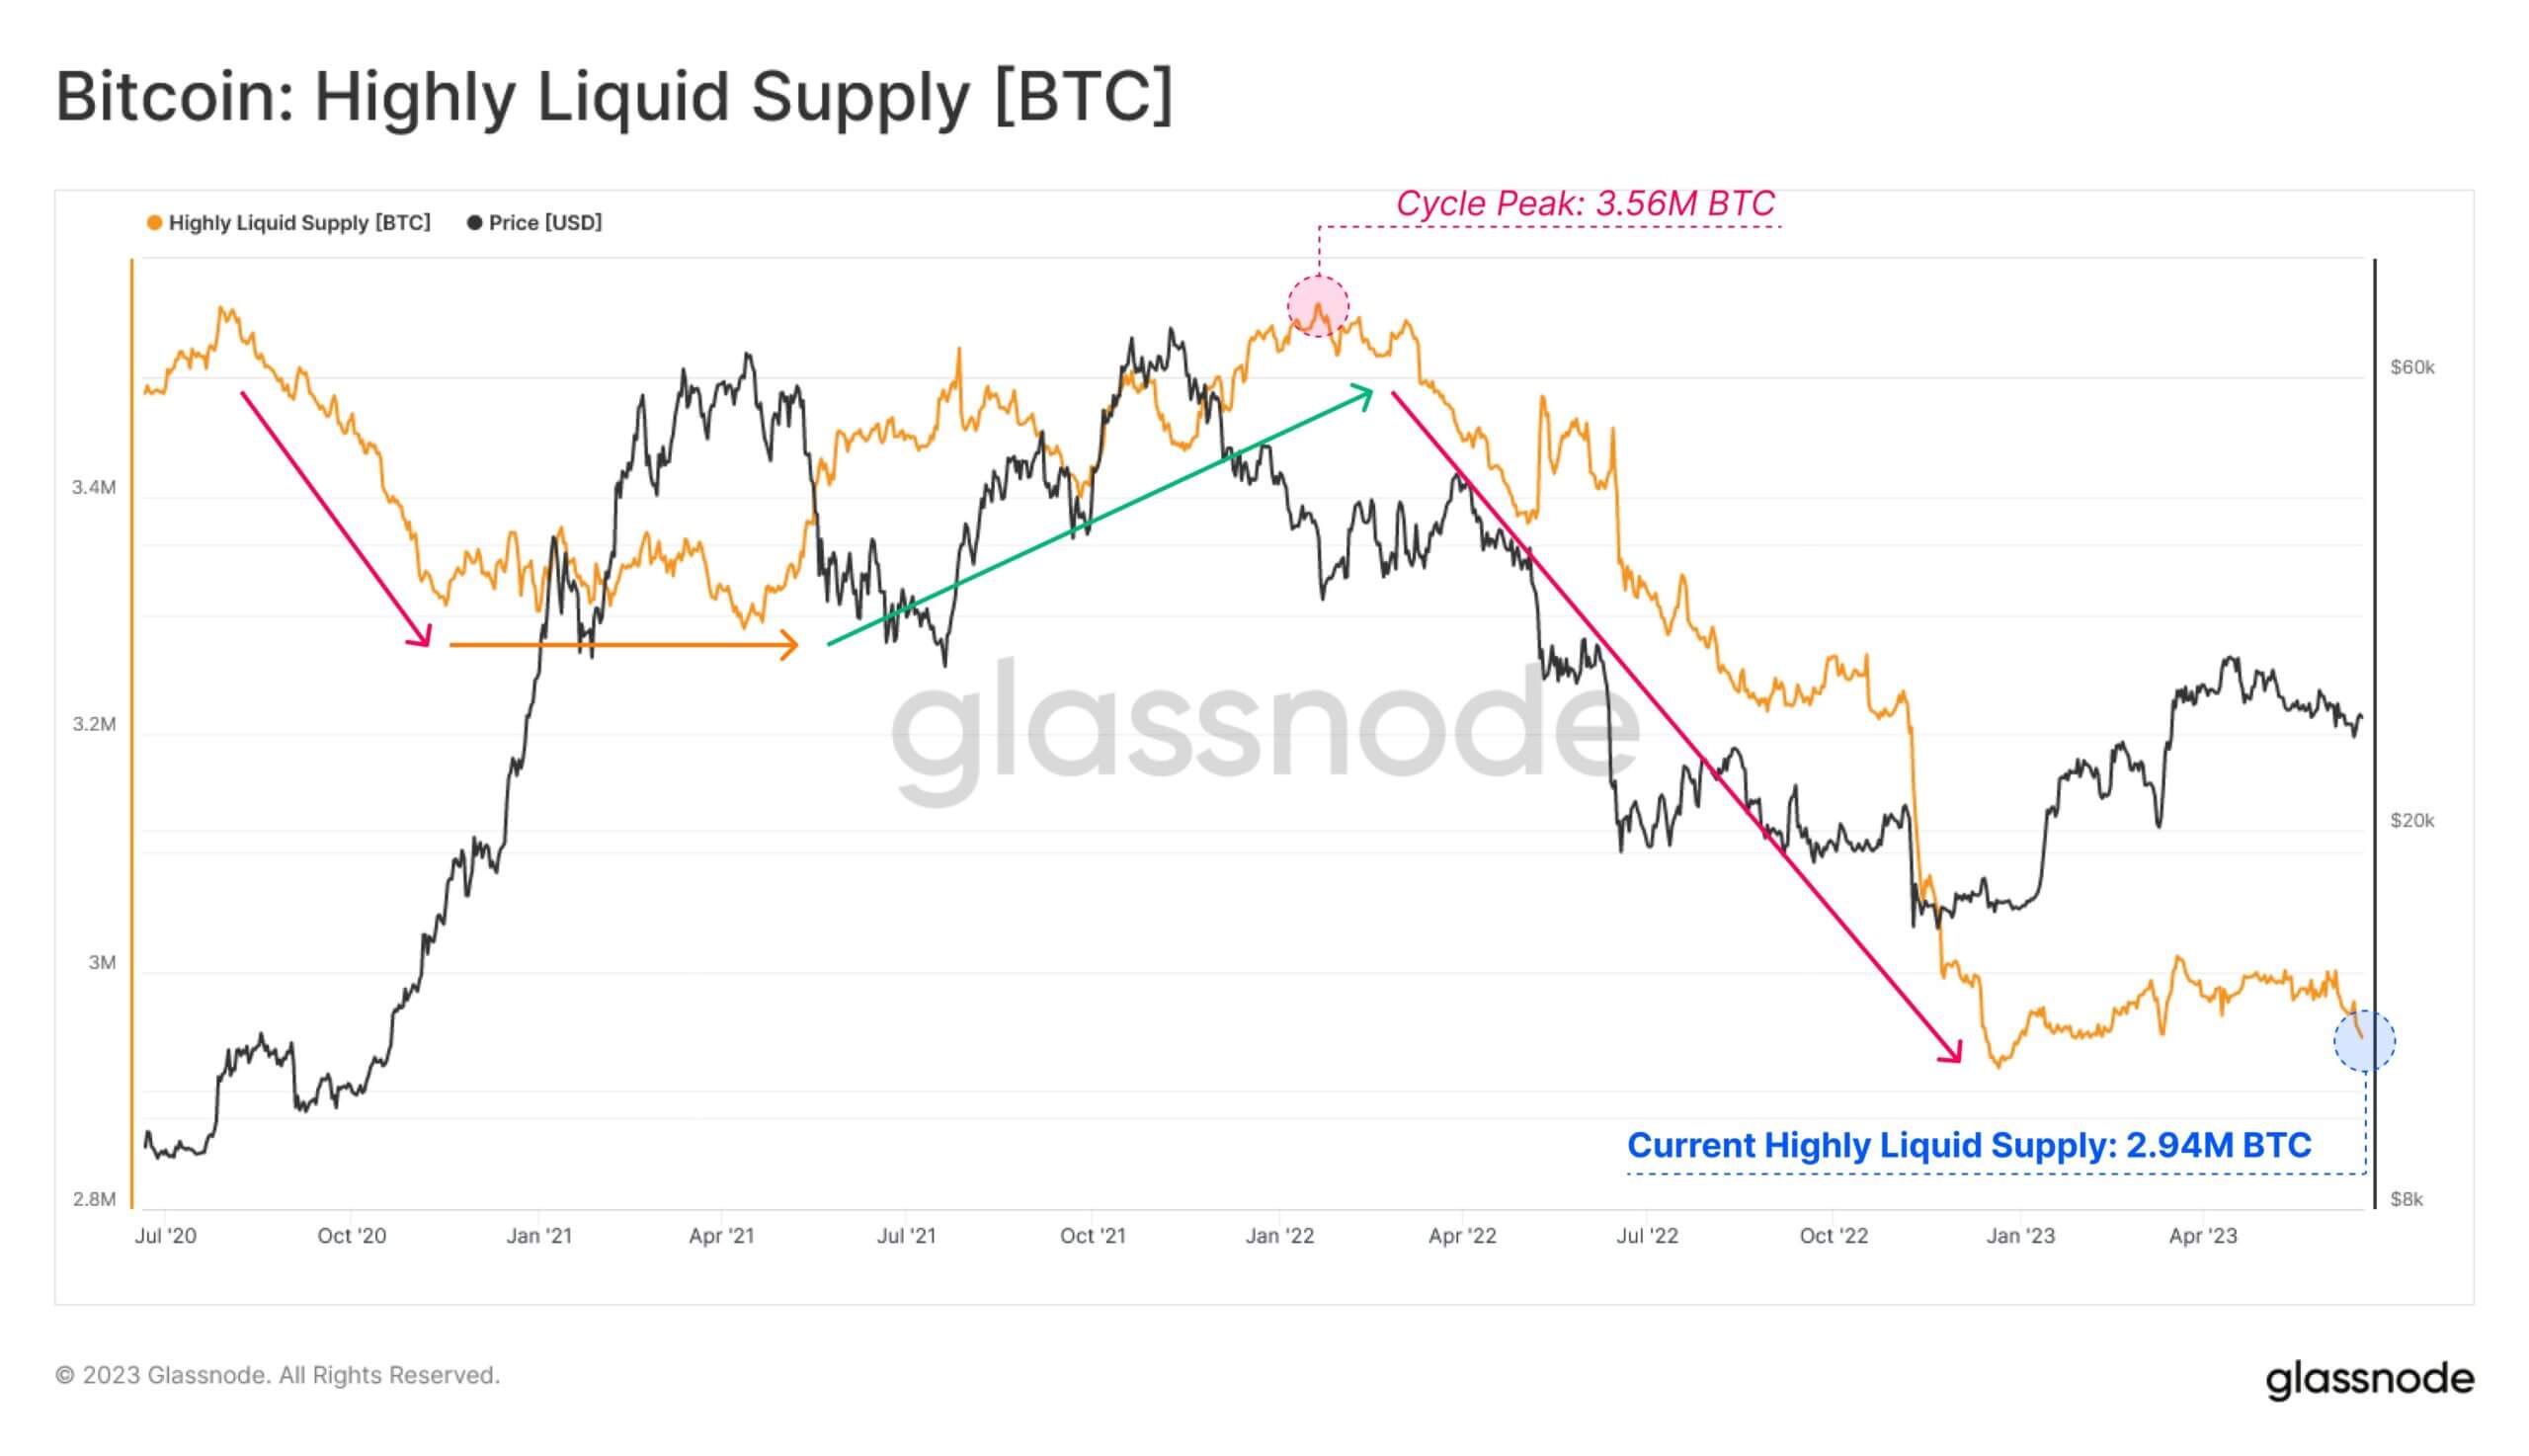 Roughly 150K Bitcoin became illiquid in past 30 days